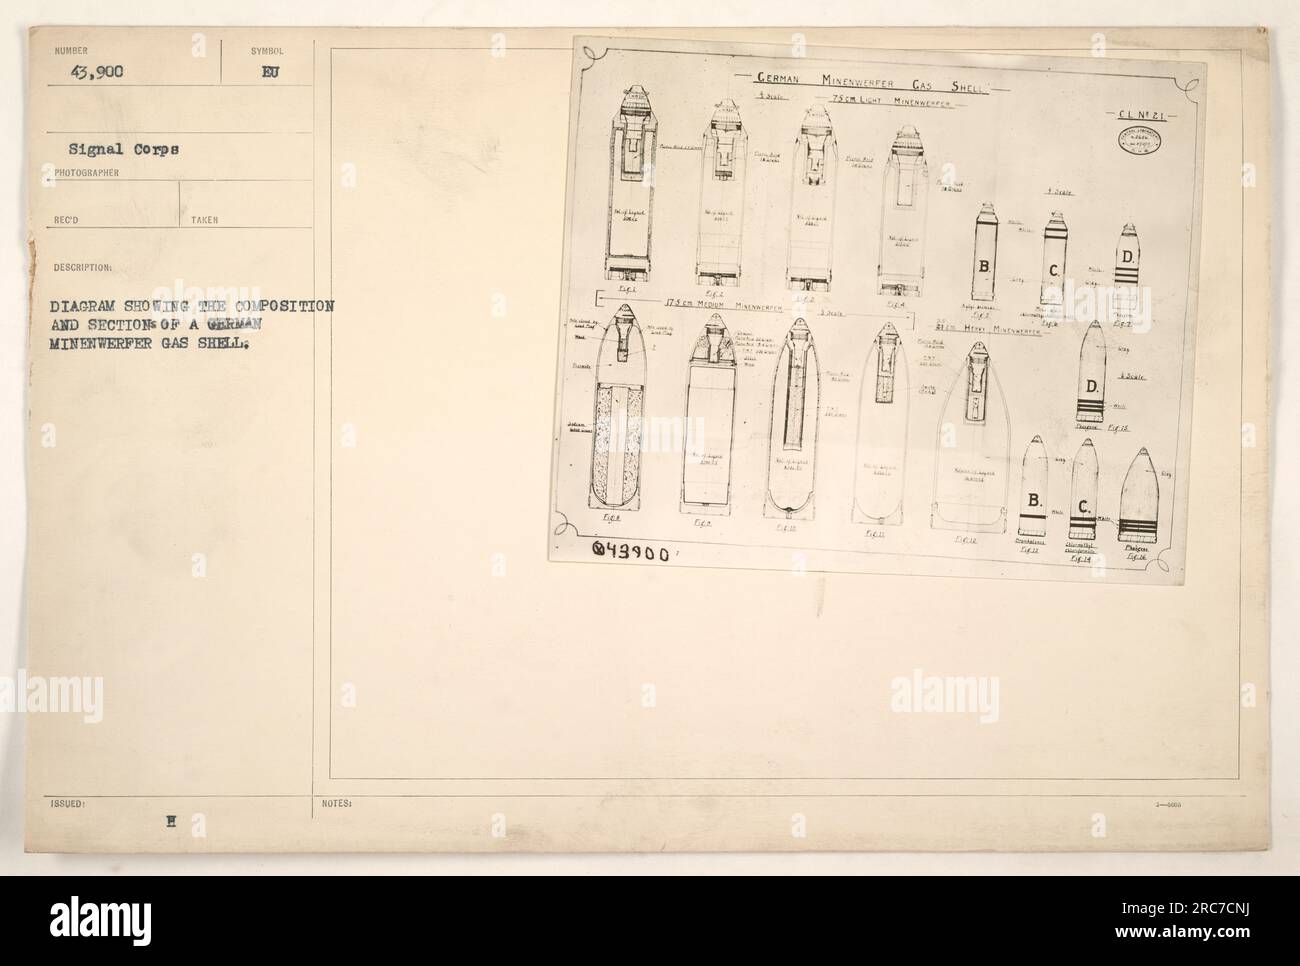 This image shows a diagram of the composition and sections of a German Minenwerfer gas shell. The shell is labeled as a 'Cermas Minenwerfer Ces Shell 1 F 10 Bigh 8 ST B Wa E p² B. 14 D.' Stock Photo